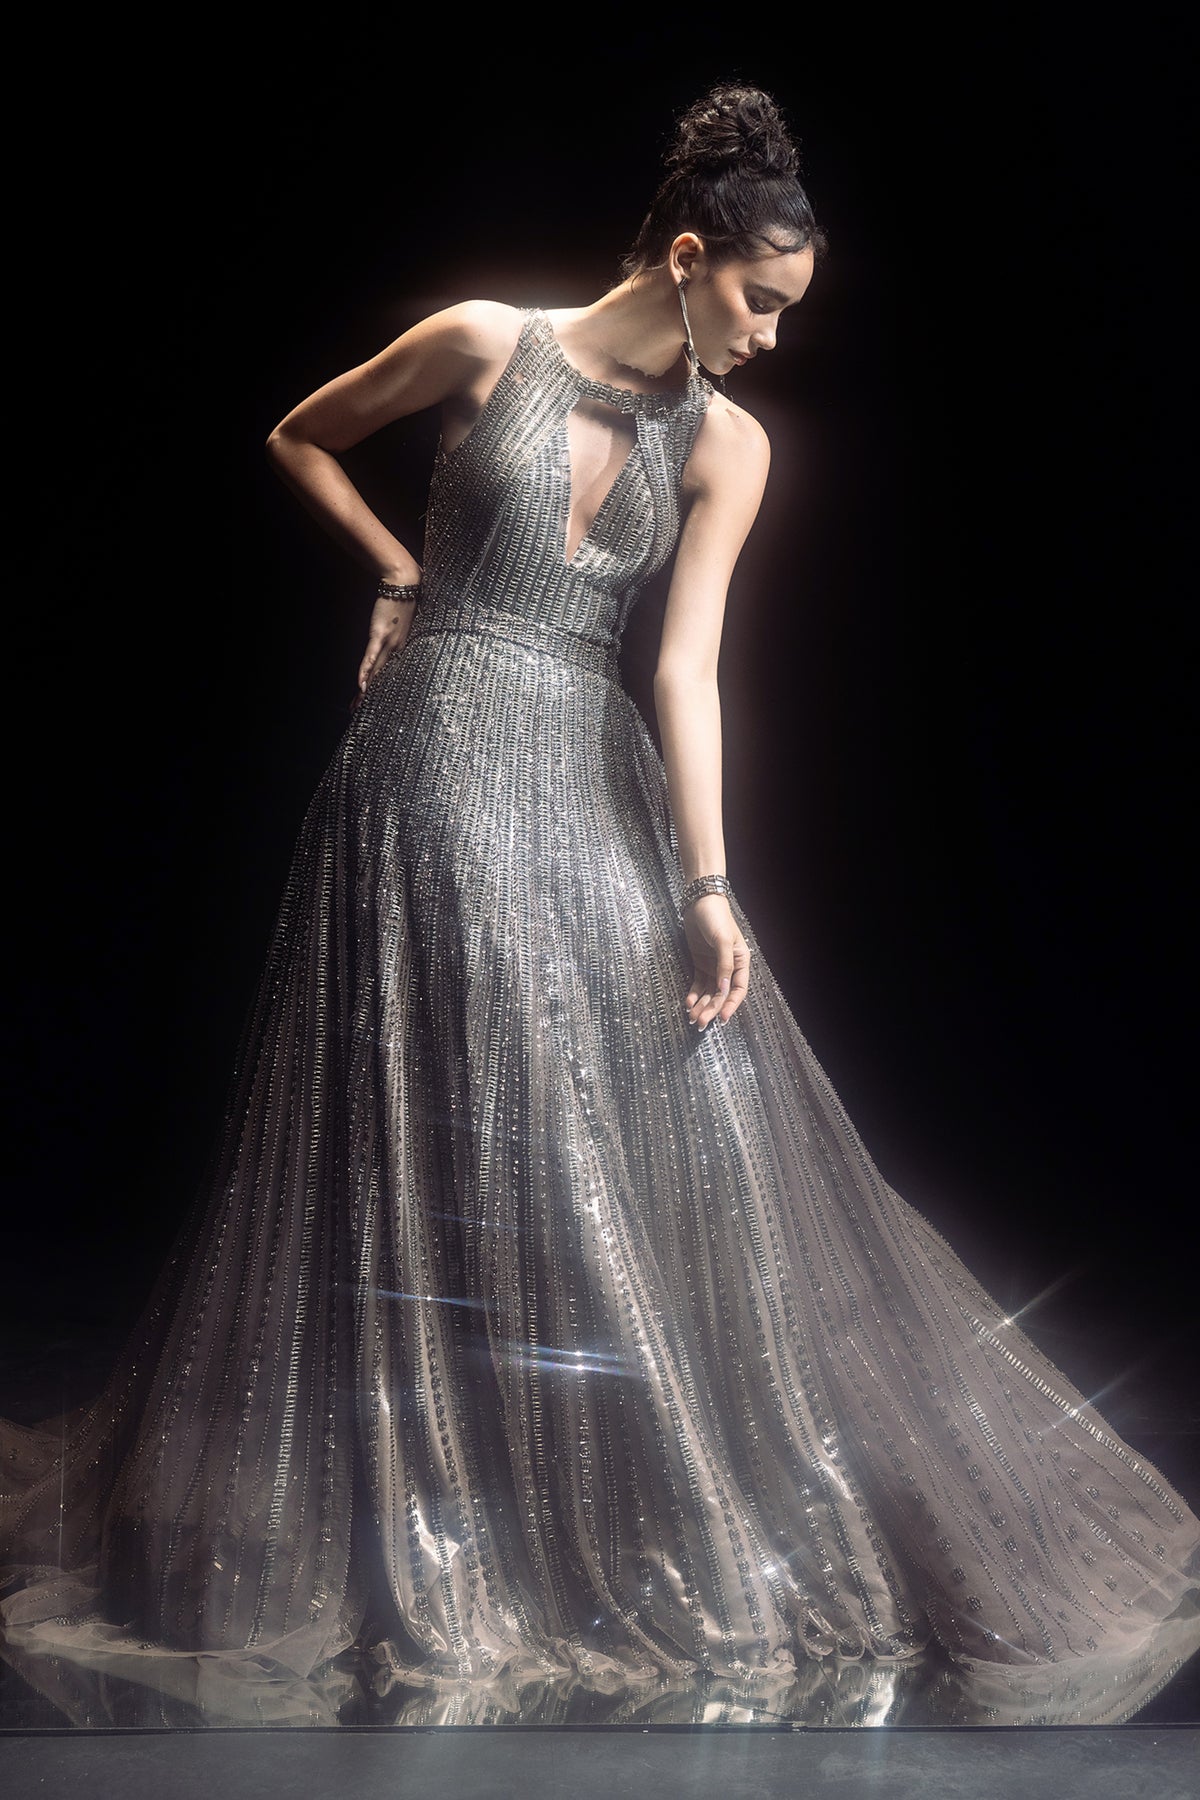 Fully Embellished crytsals And Metallic Stripes Gown